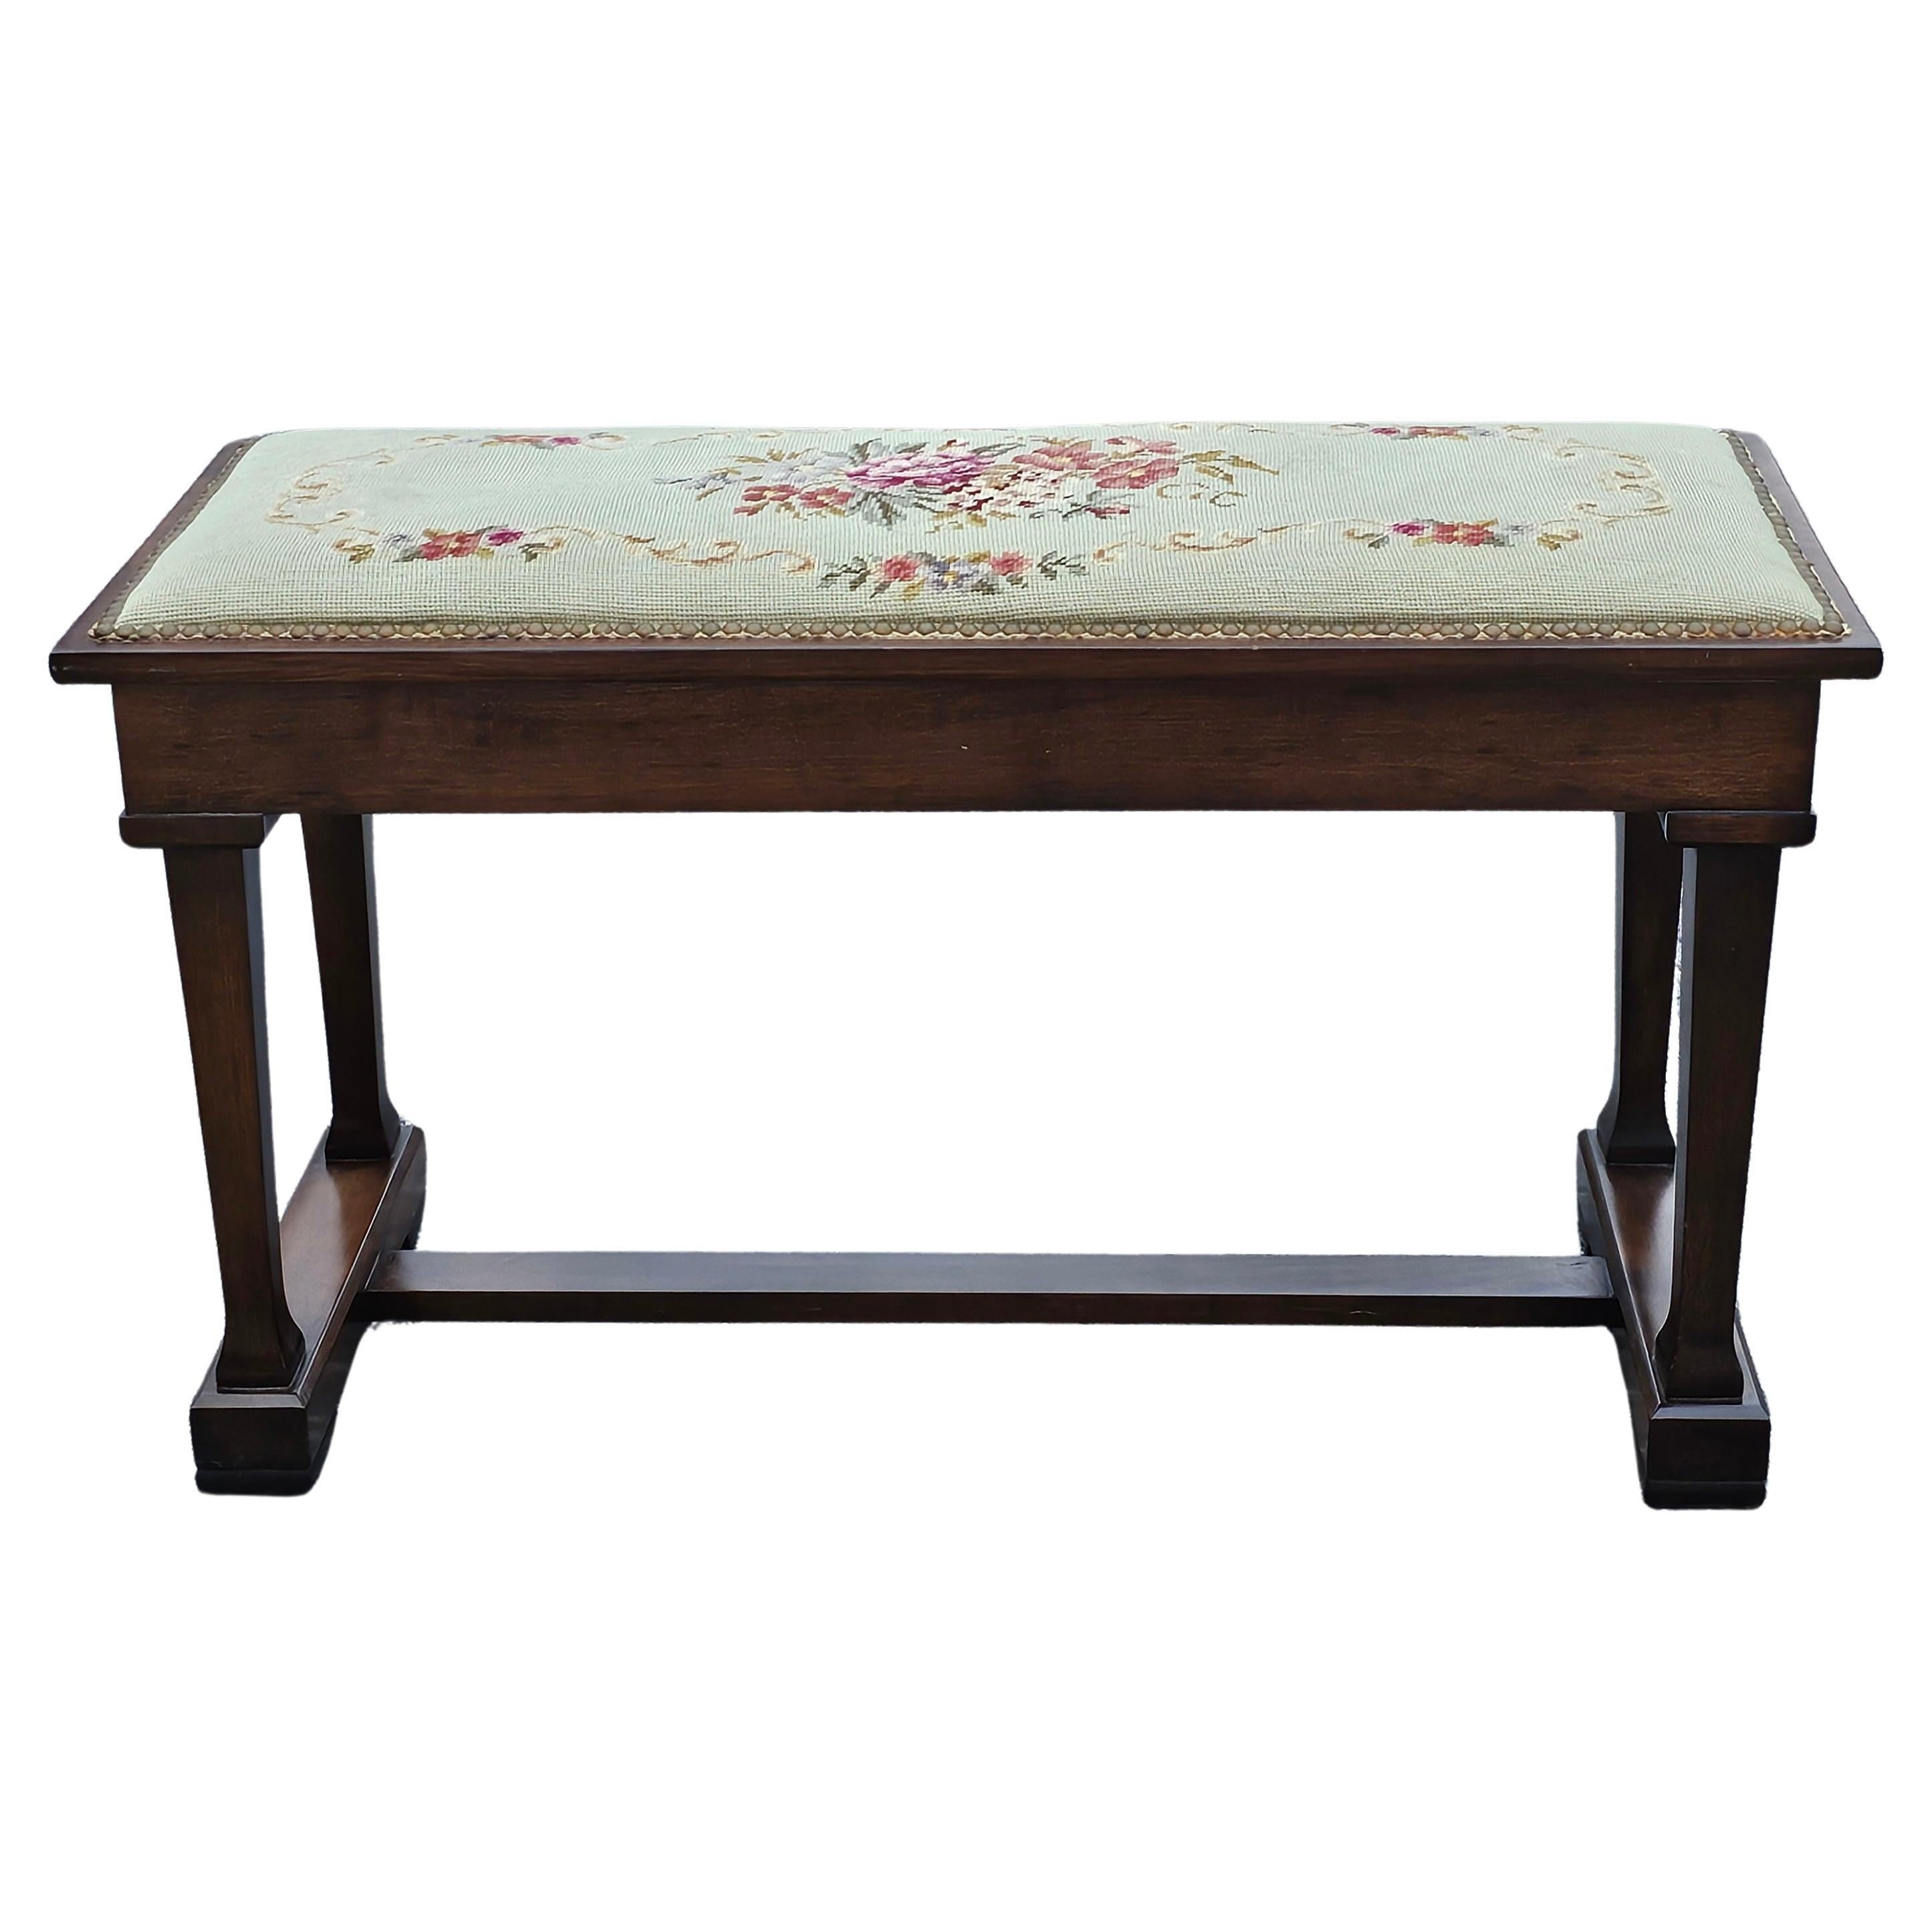 Mid 20th Century Walnut NailHead Trims and Needlepoint Upholstered Trestle Bench For Sale 1